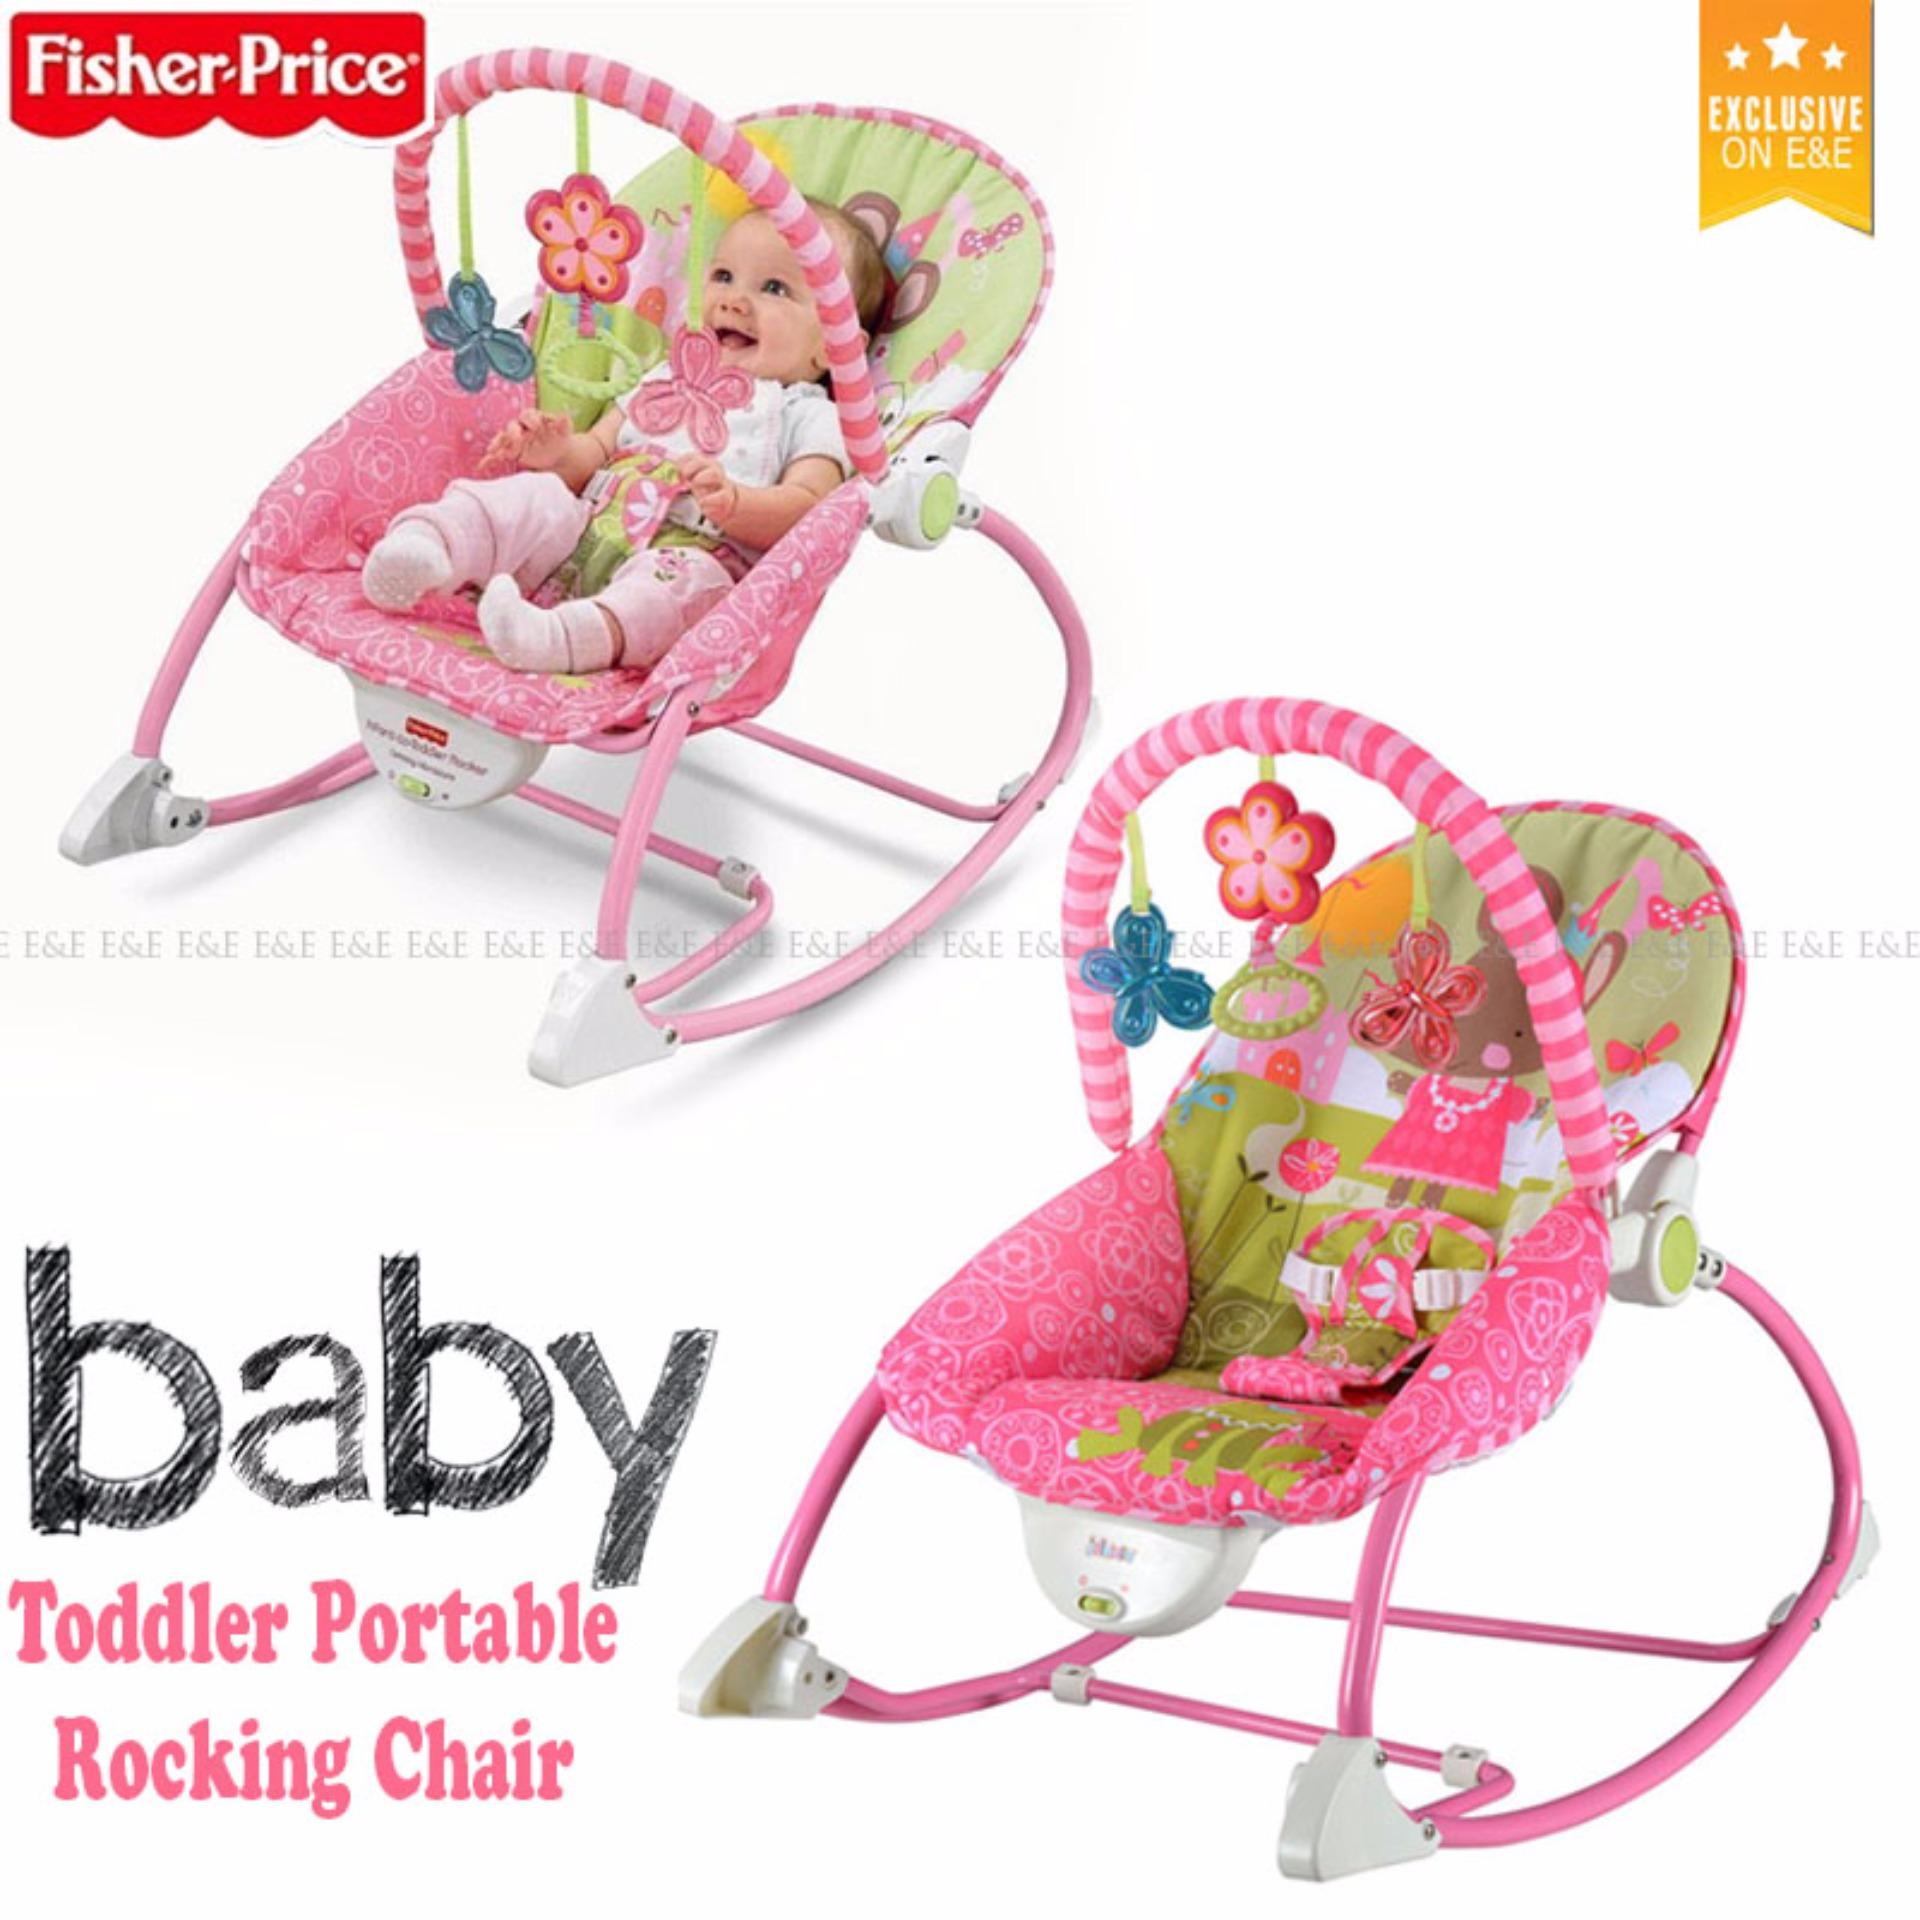 100 Fisher Price Musical Chair Pink 2002 Fisher Price